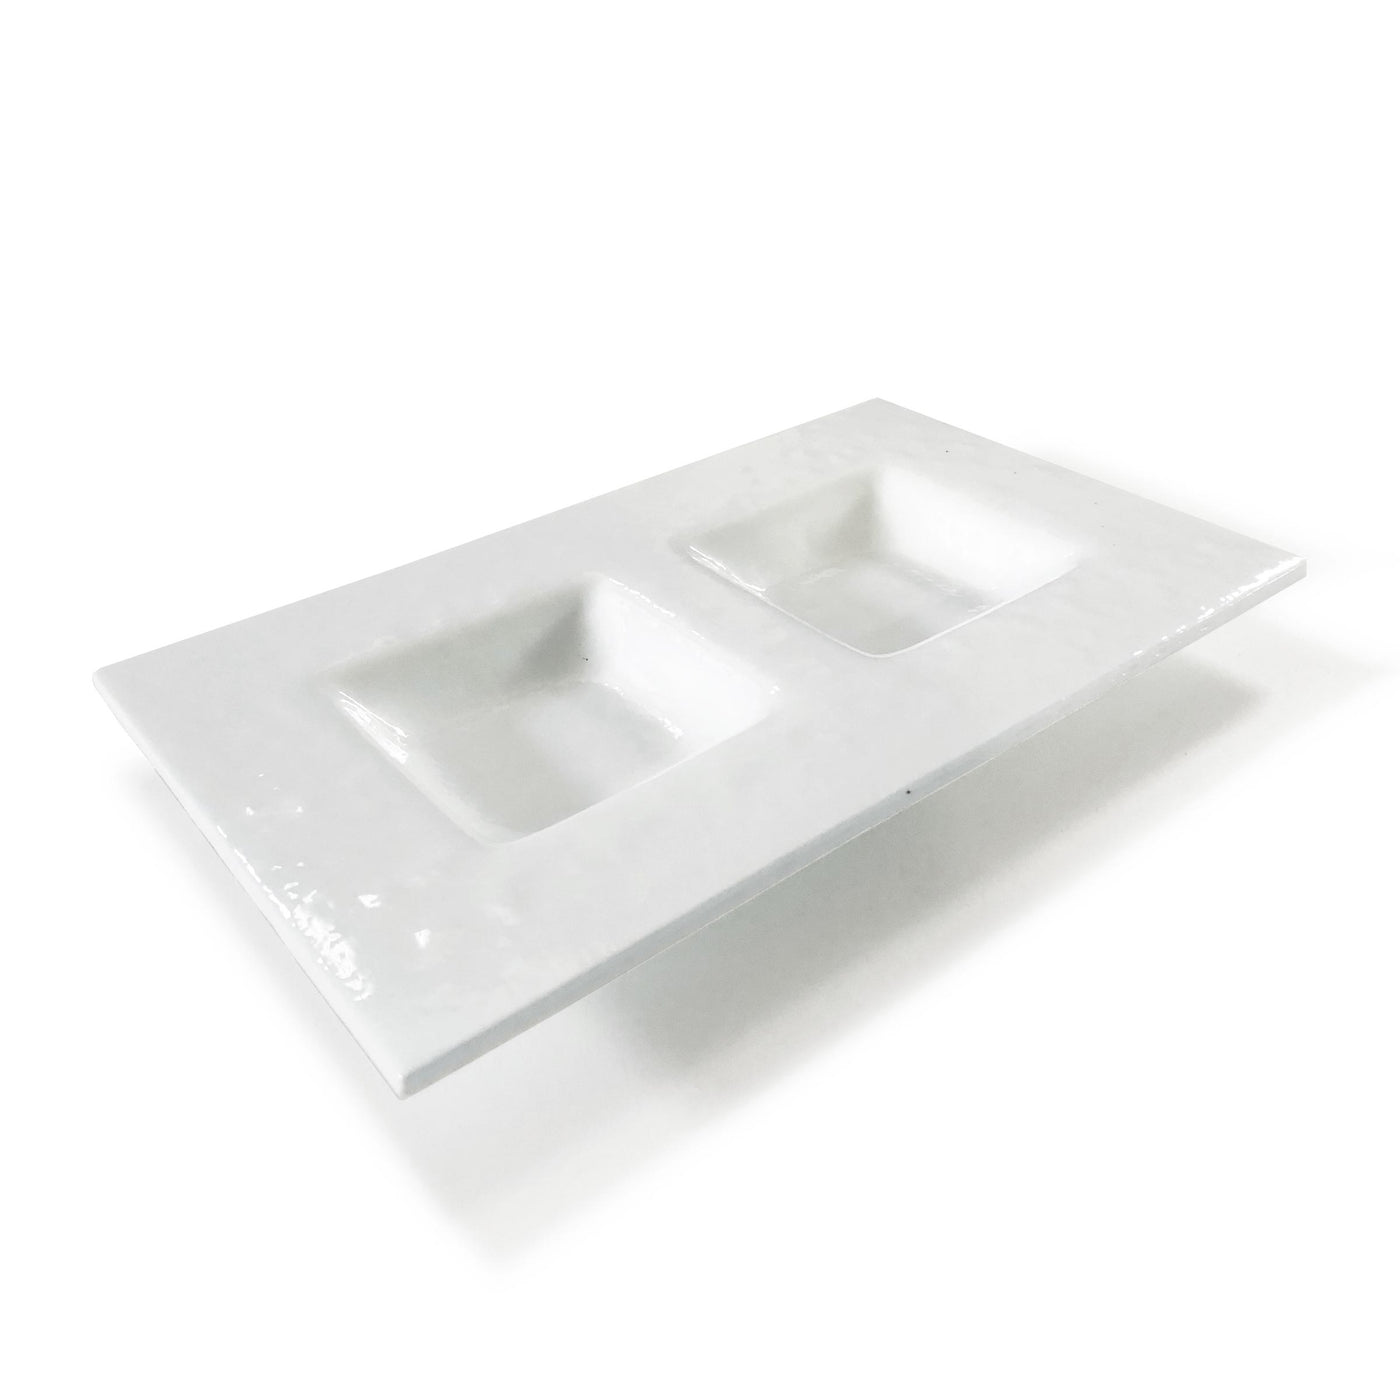 Murano Glass Divided Serving Platter TOTAL WHITE by D.i. Più Andretto Design 01